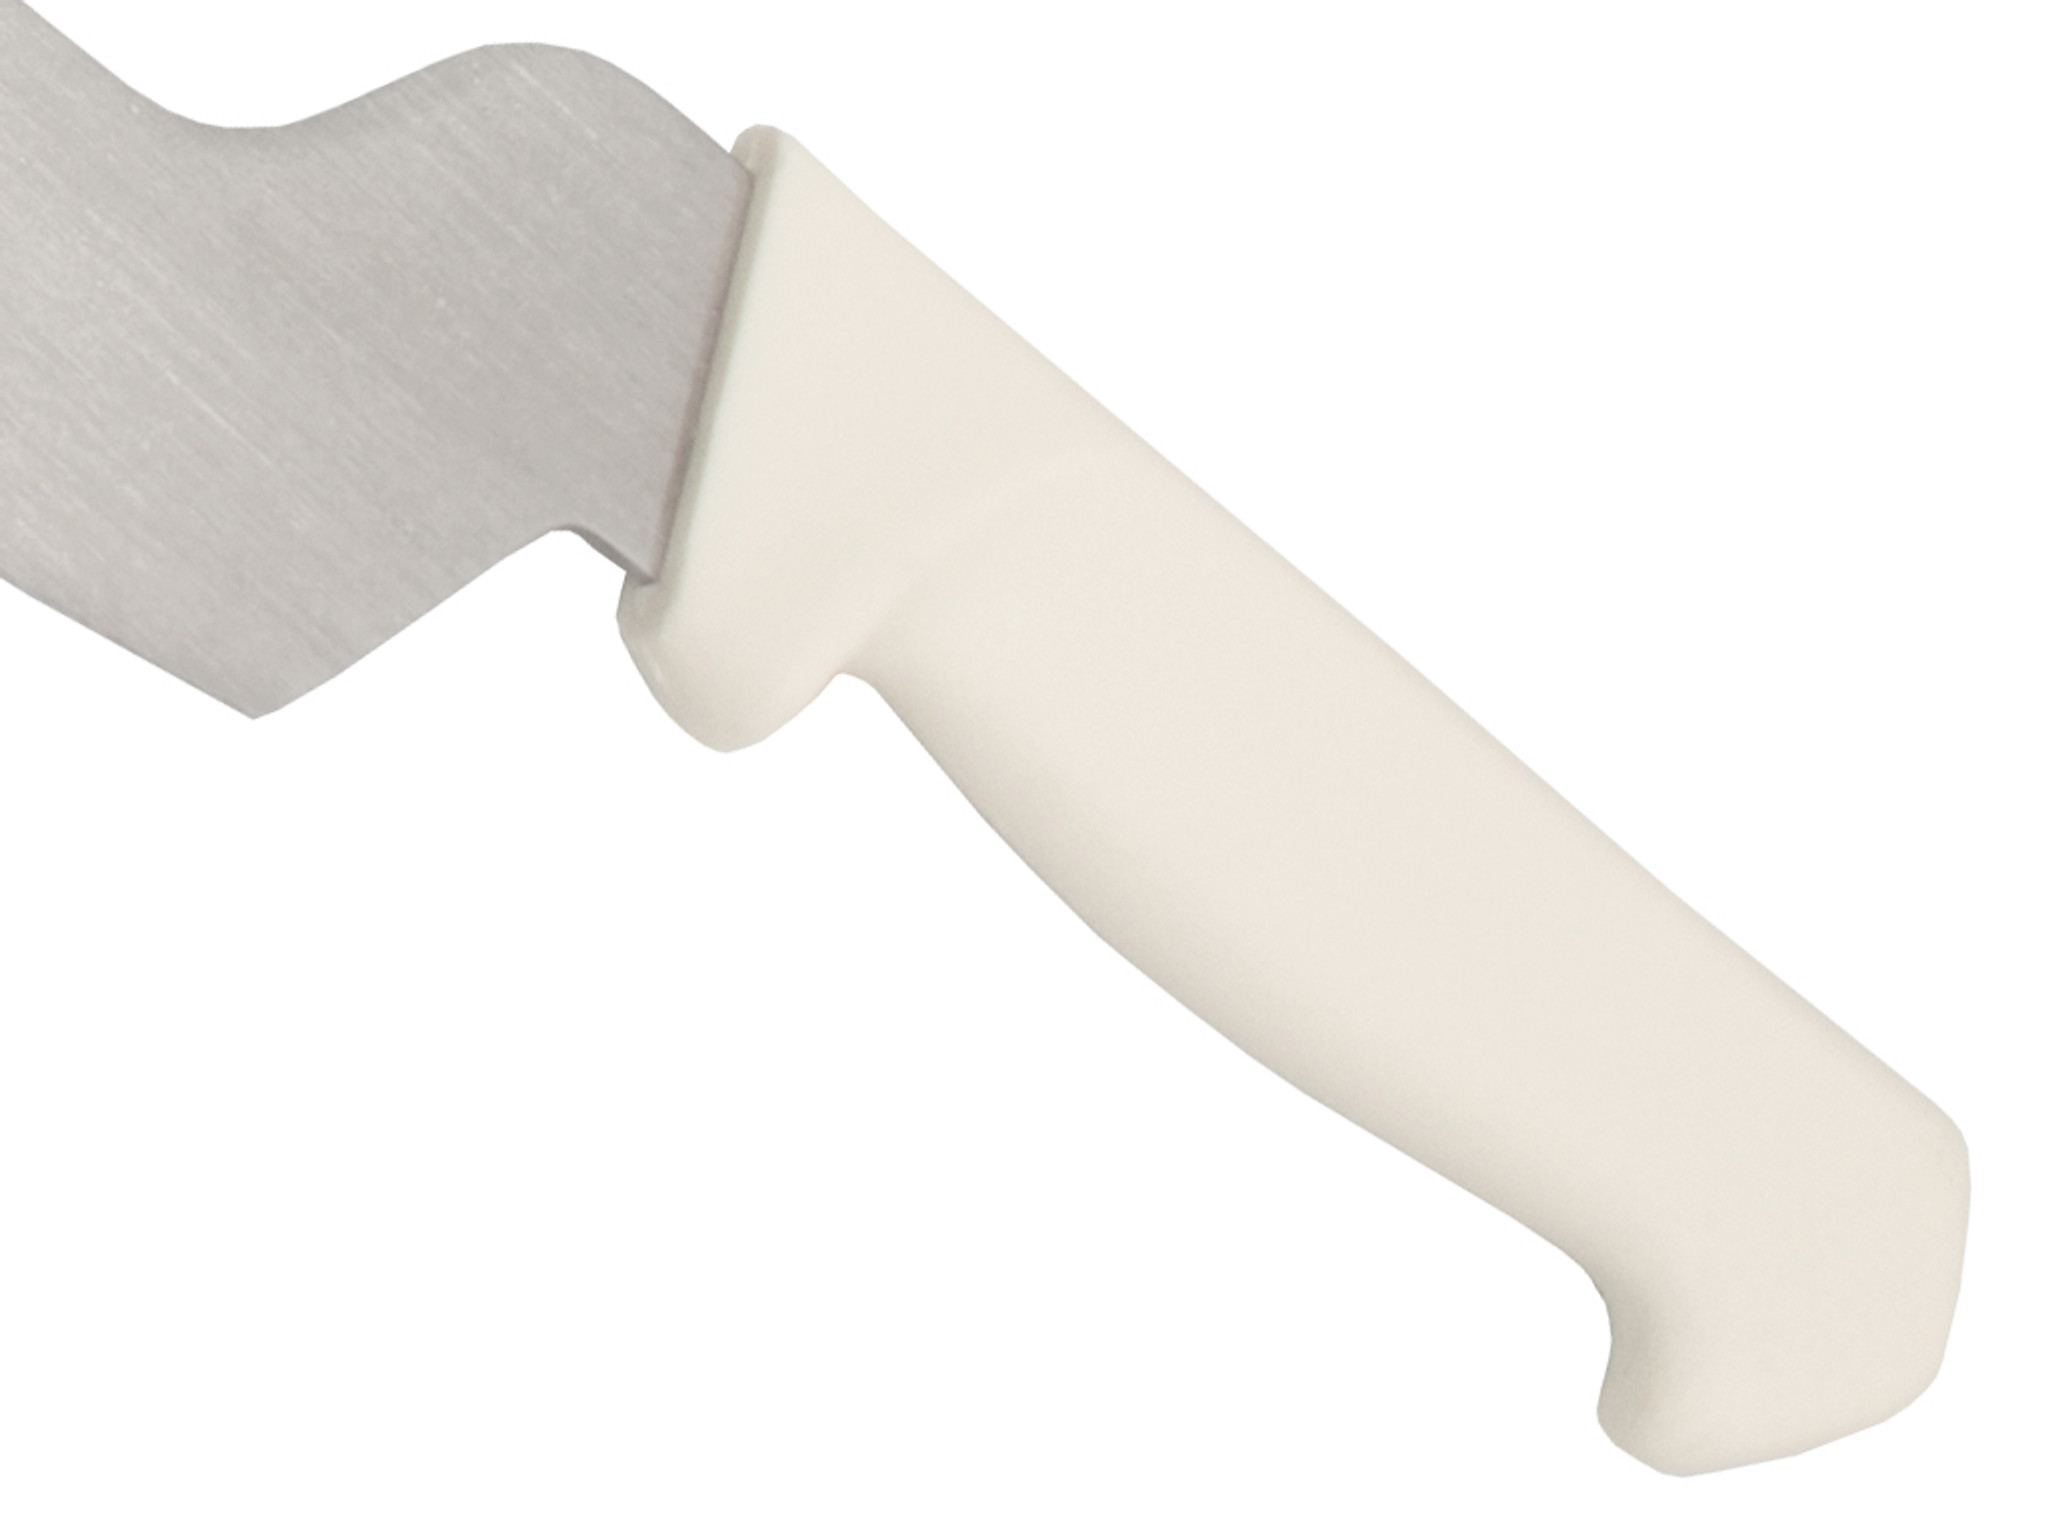 Ary 6 x 3 Dough Cutter / Scraper with White Poly Grip Handle ZWP226